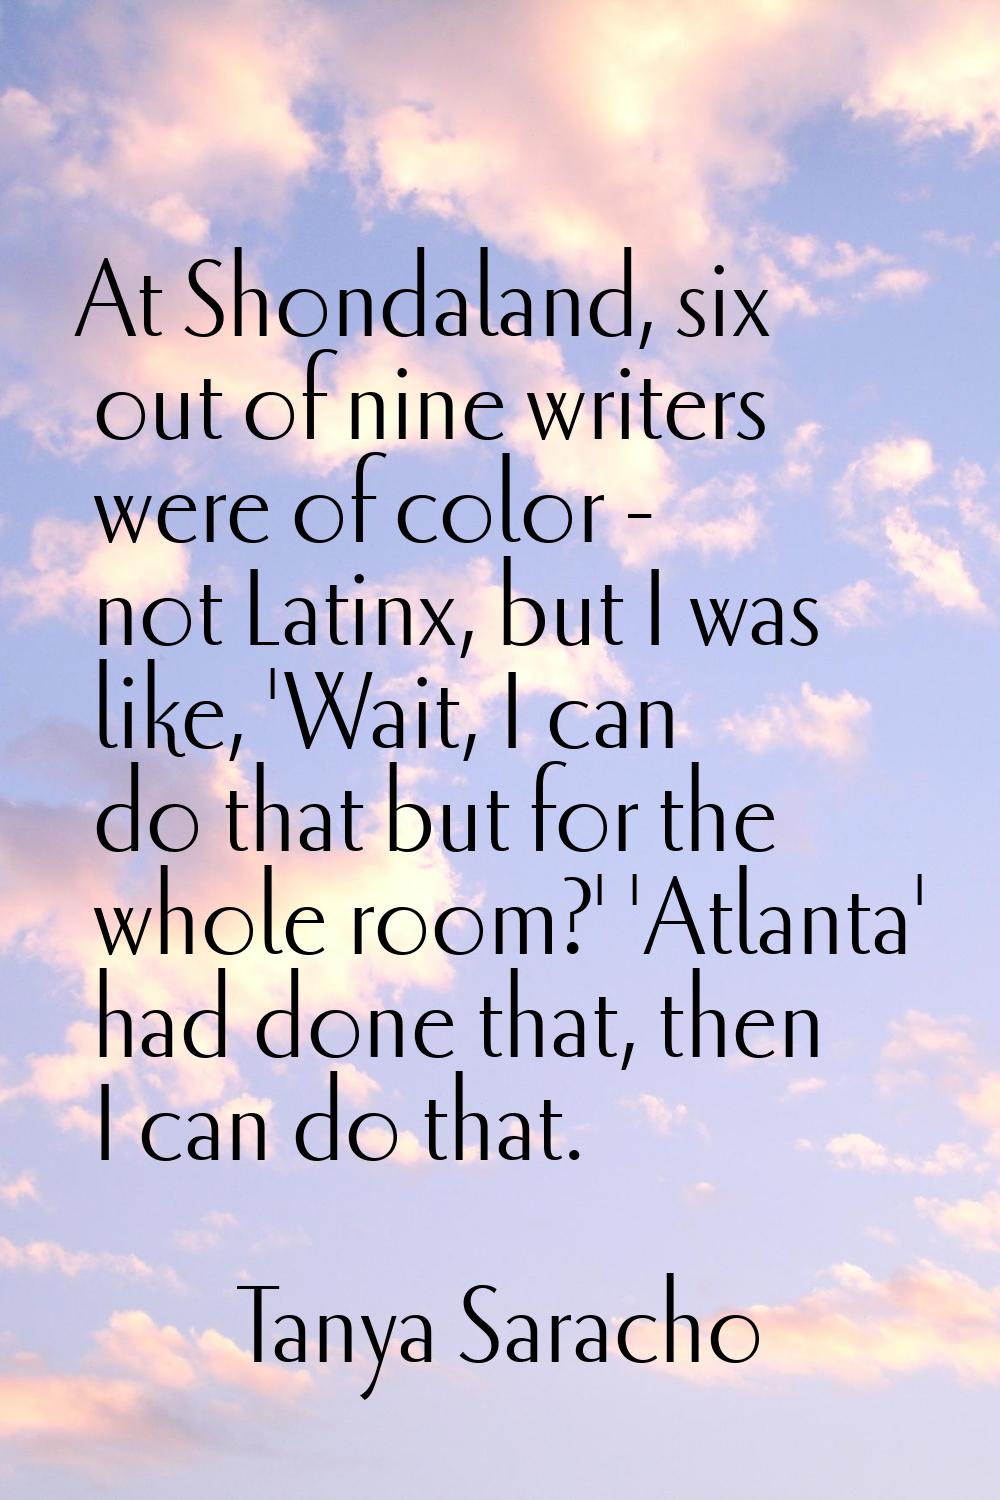 At Shondaland, six out of nine writers were of color - not Latinx, but I was like, 'Wait, I can do 